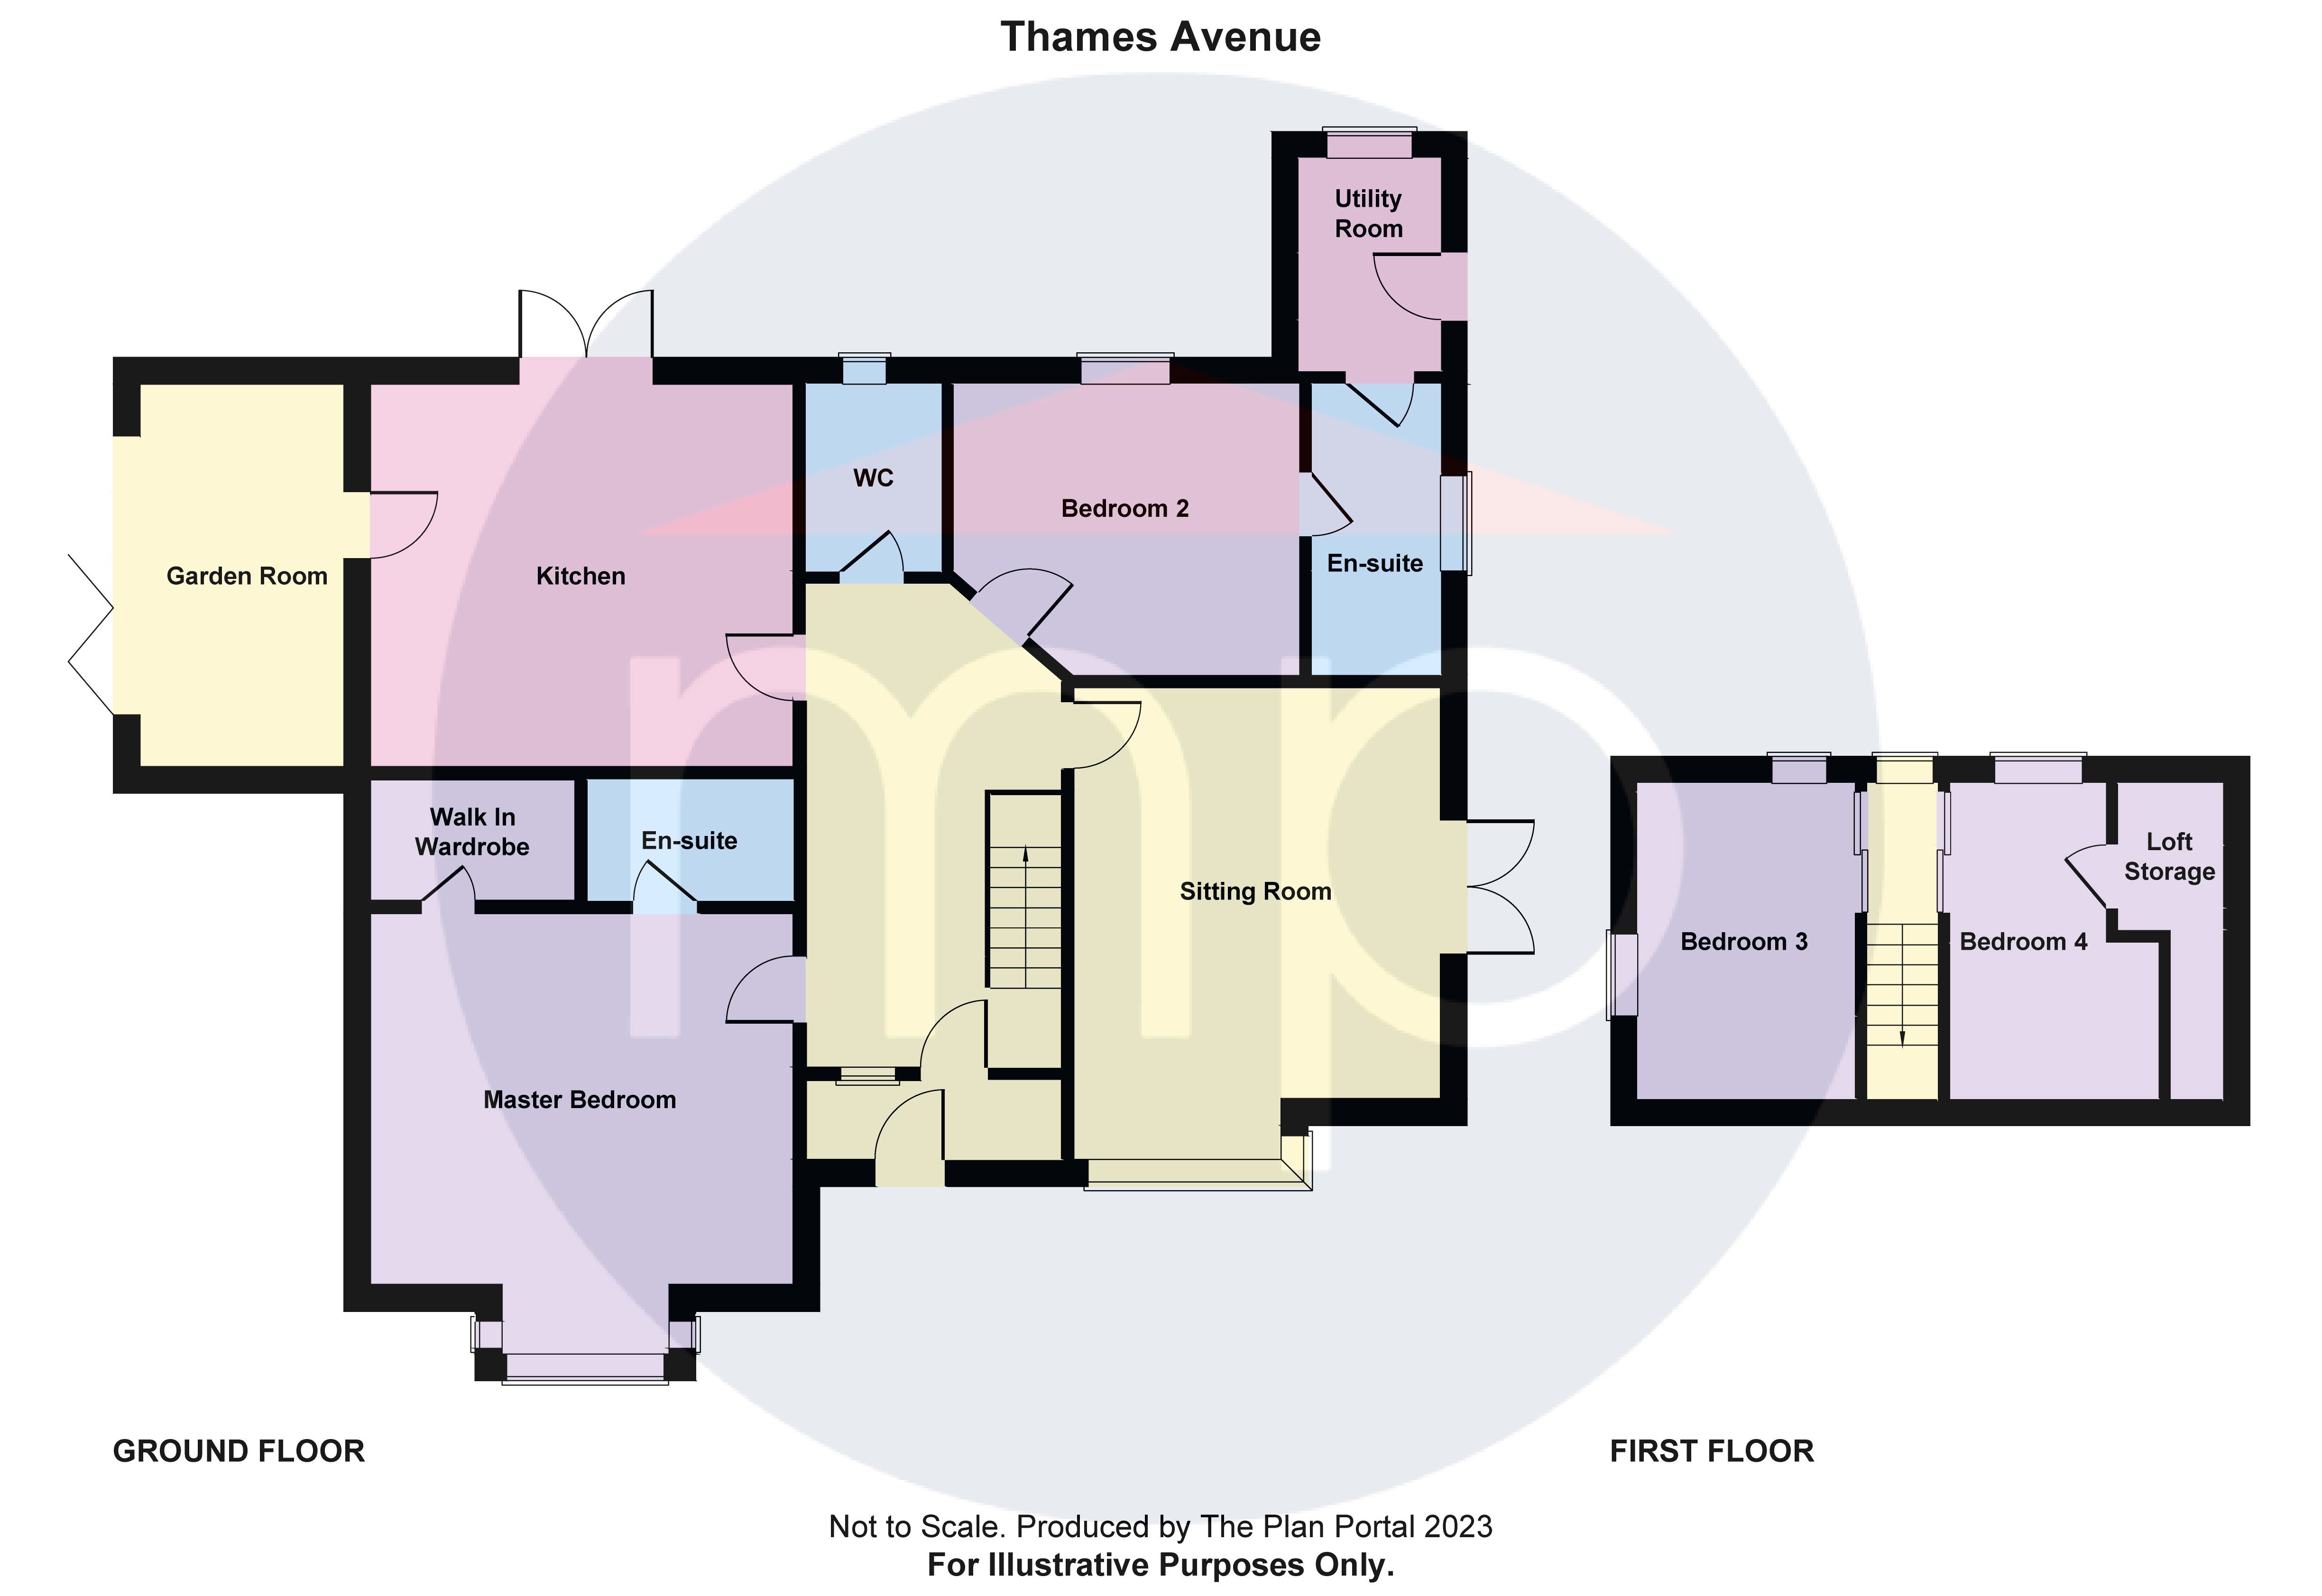 4 bed bungalow for sale in Thames Avenue, Guisborough - Property floorplan